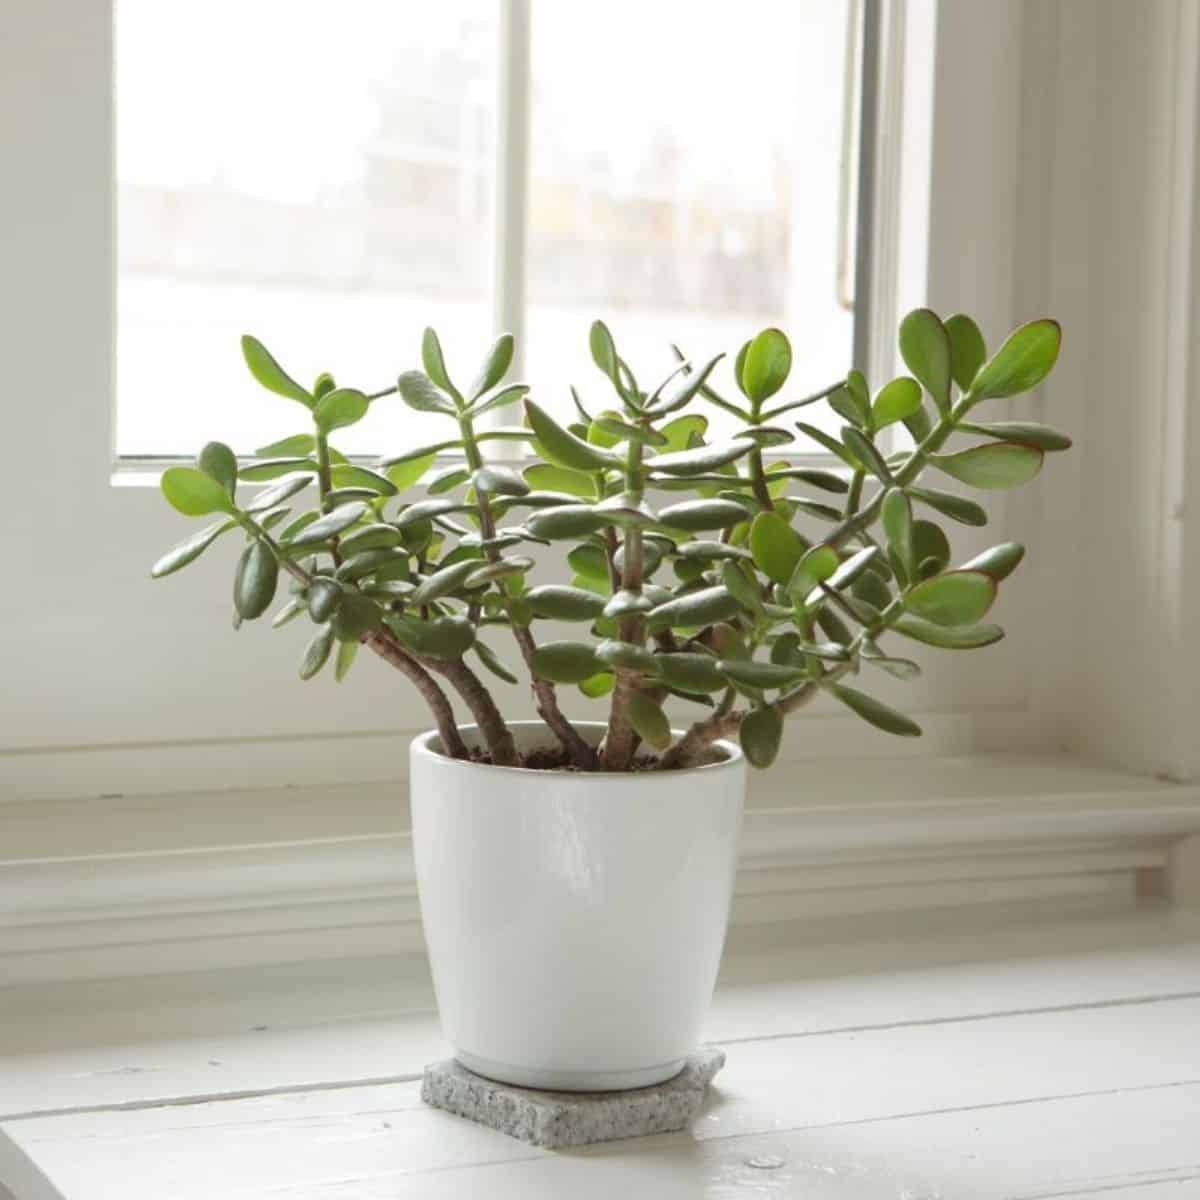 Tall succulent in a white pot on a table near window.